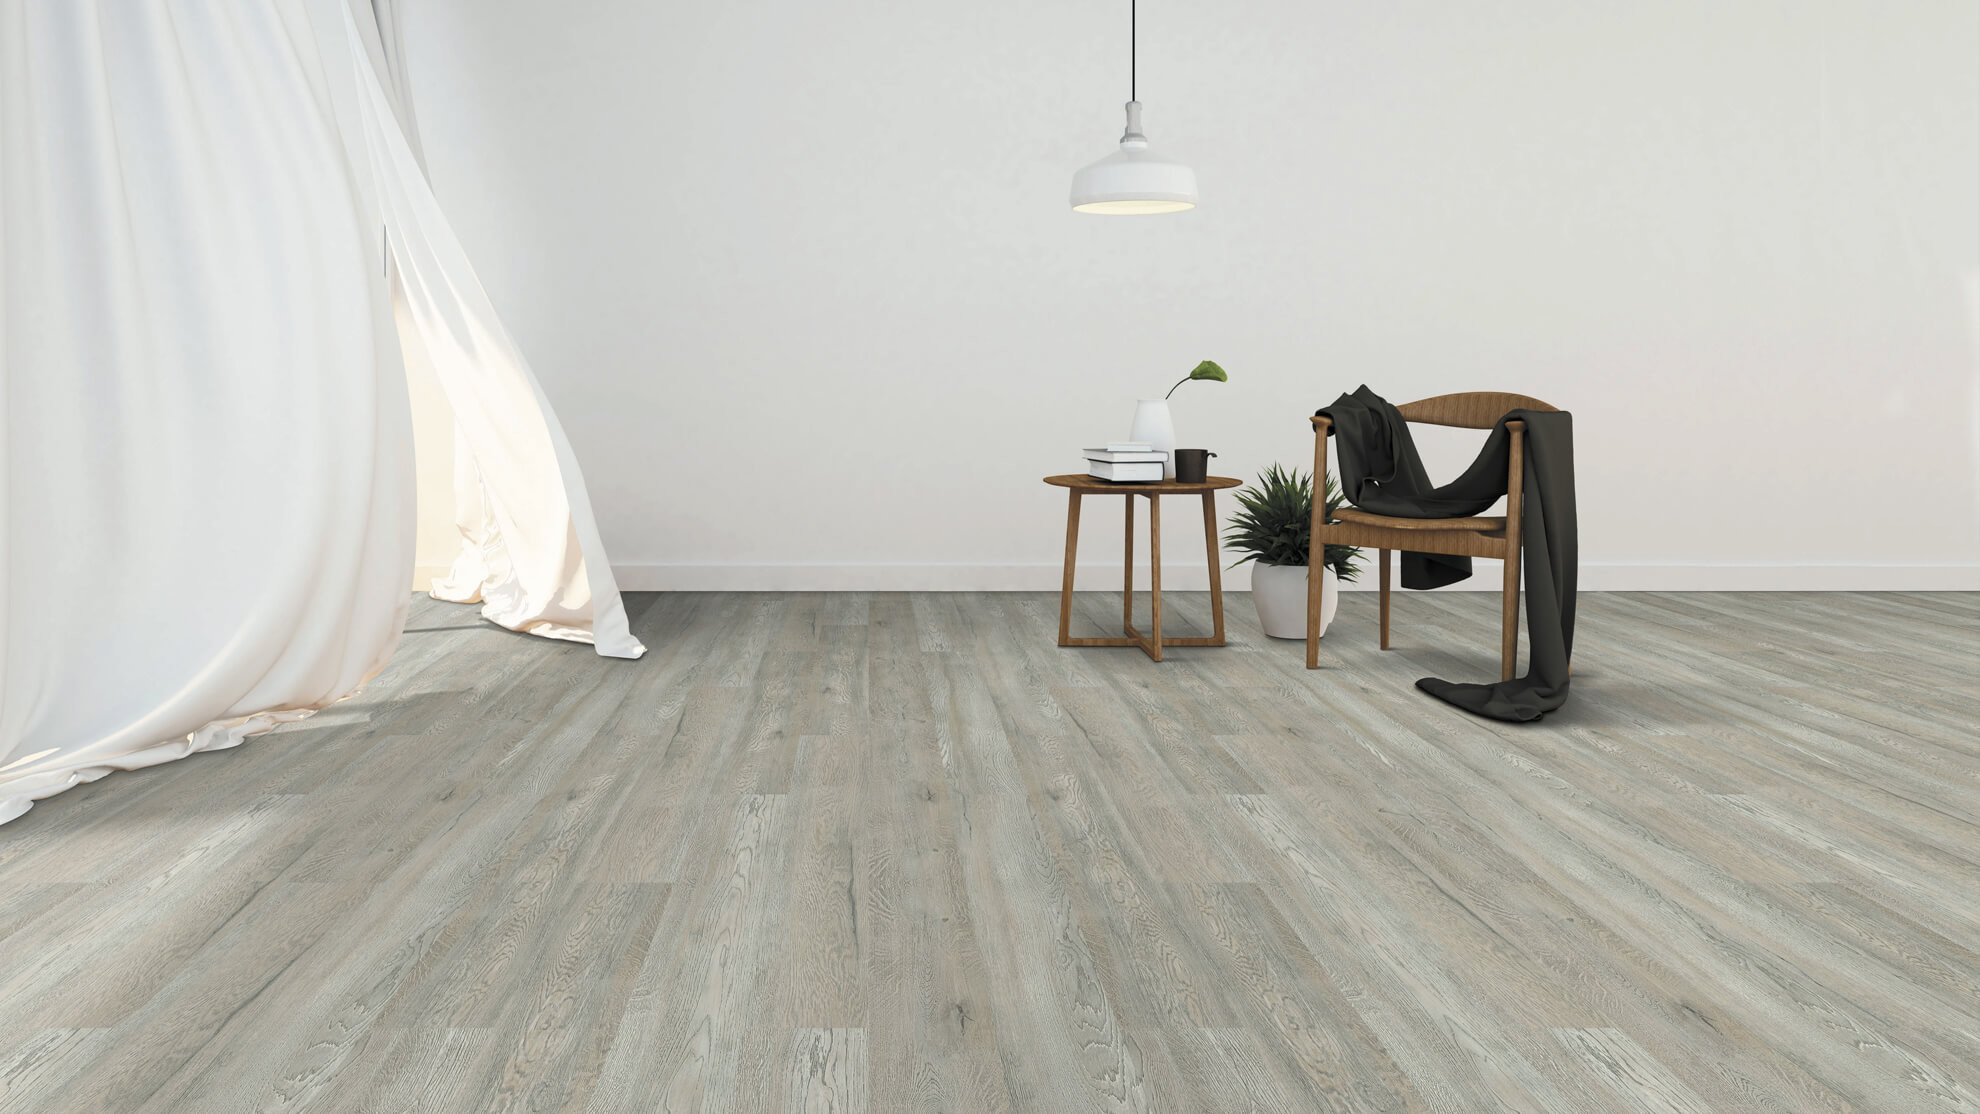 15 Stunning How Do You Install Hardwood Floors On A Concrete Slab 2024 free download how do you install hardwood floors on a concrete slab of earthwerks flooring in noble classic plus alaska oak ncr 9708